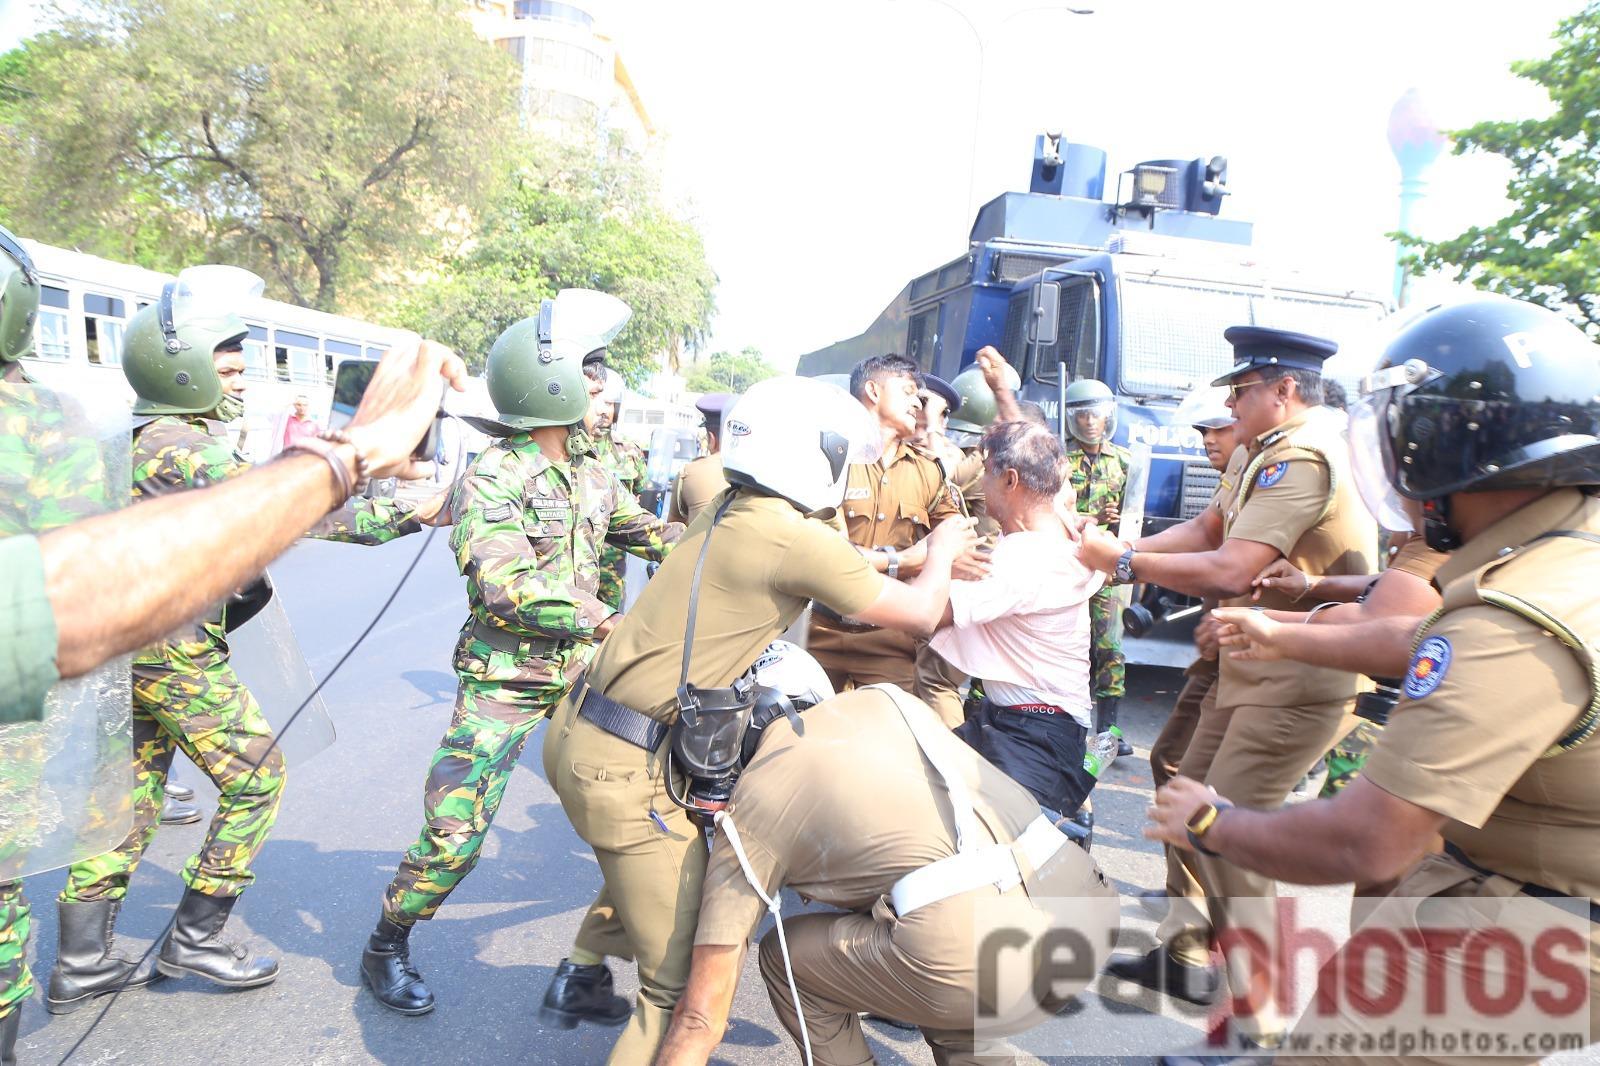 Sri Lankas police used tear gas and water cannons to disperse a protest